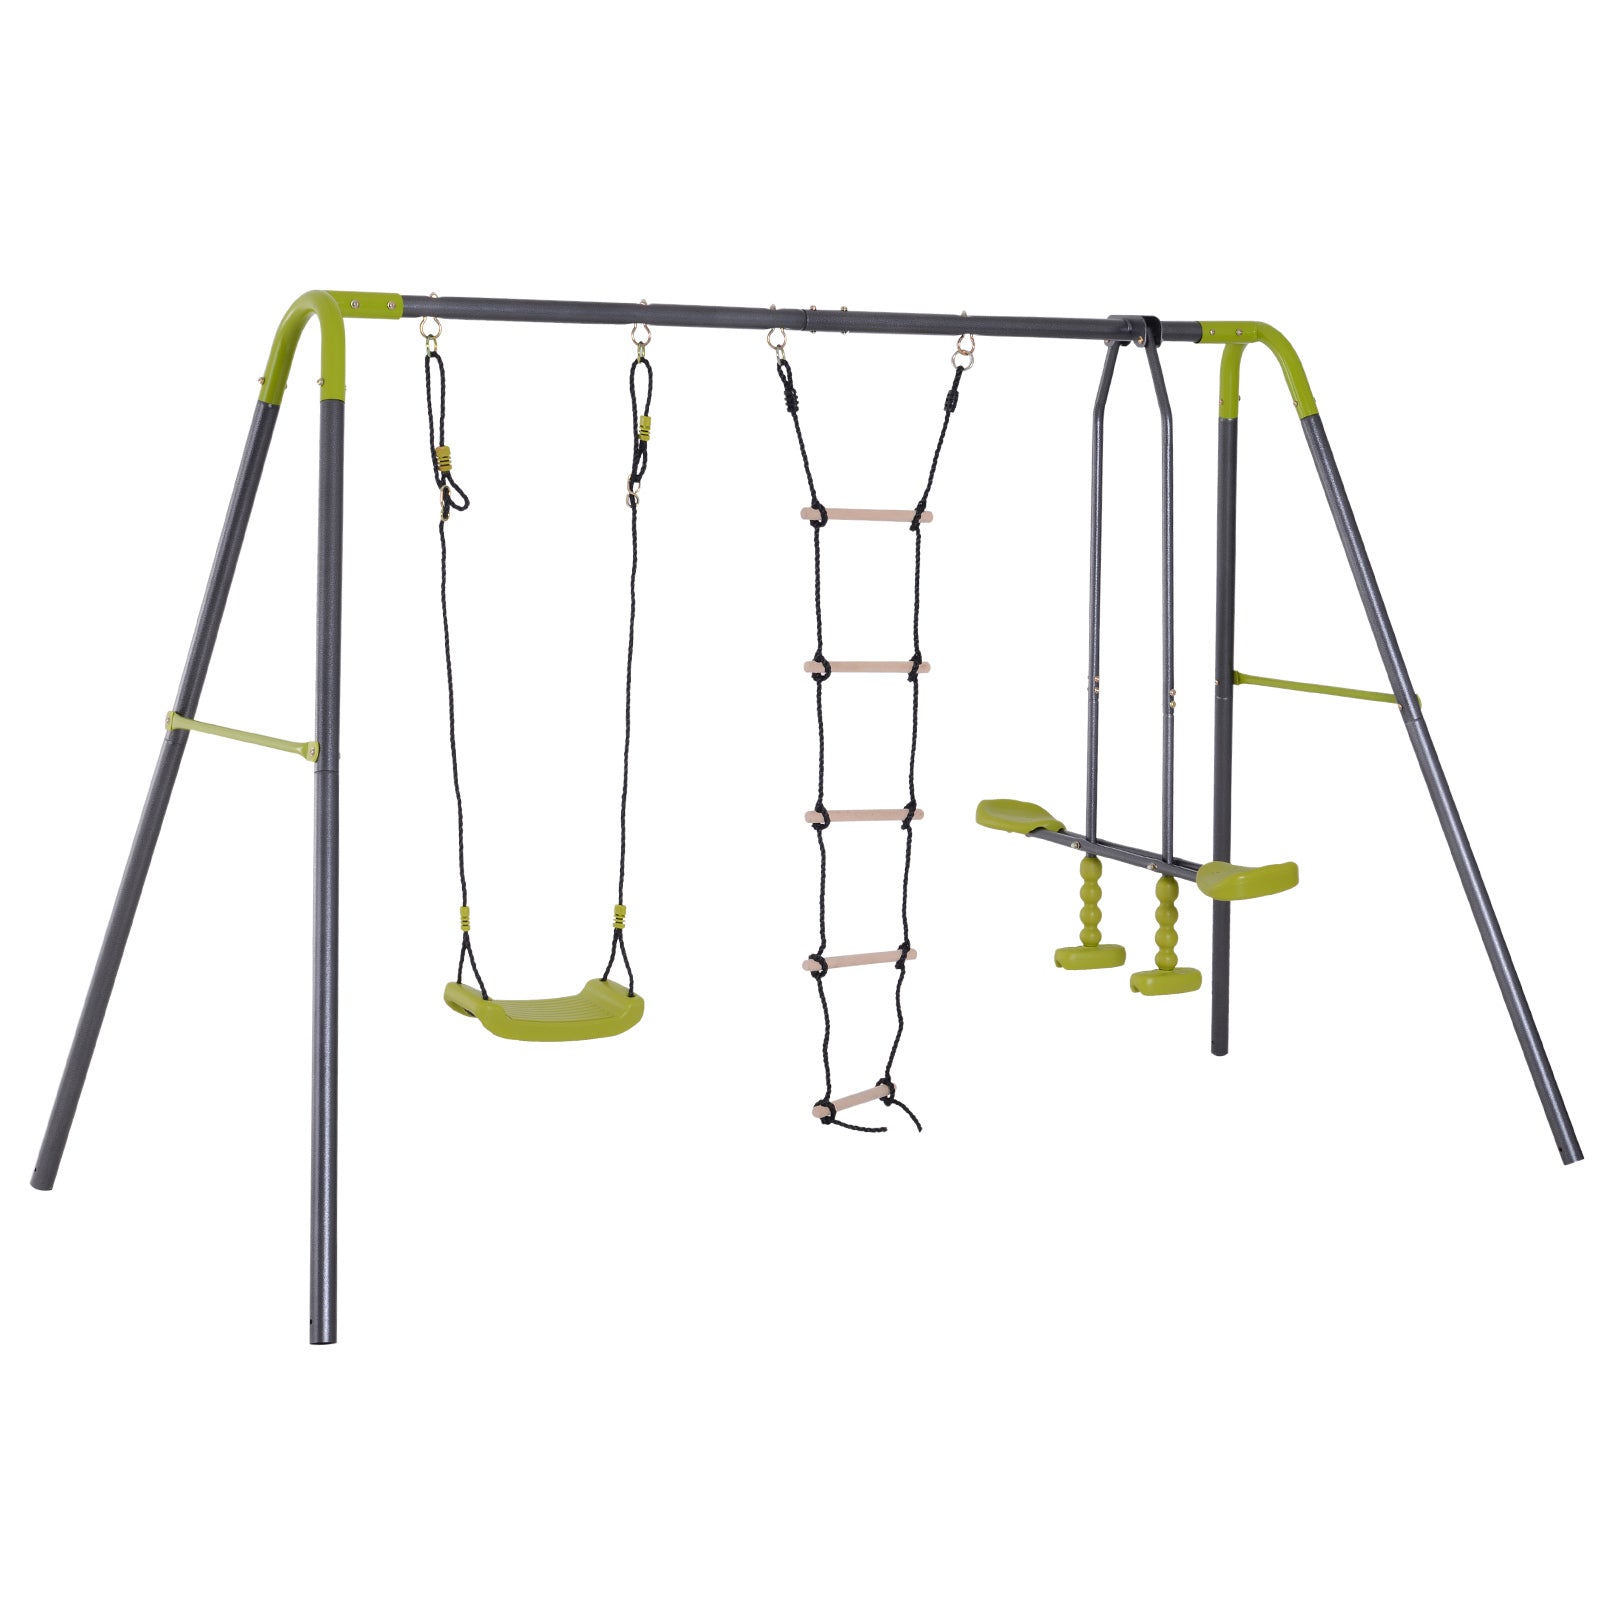 3 in 1 Kids Metal Swing Set for Backyard with